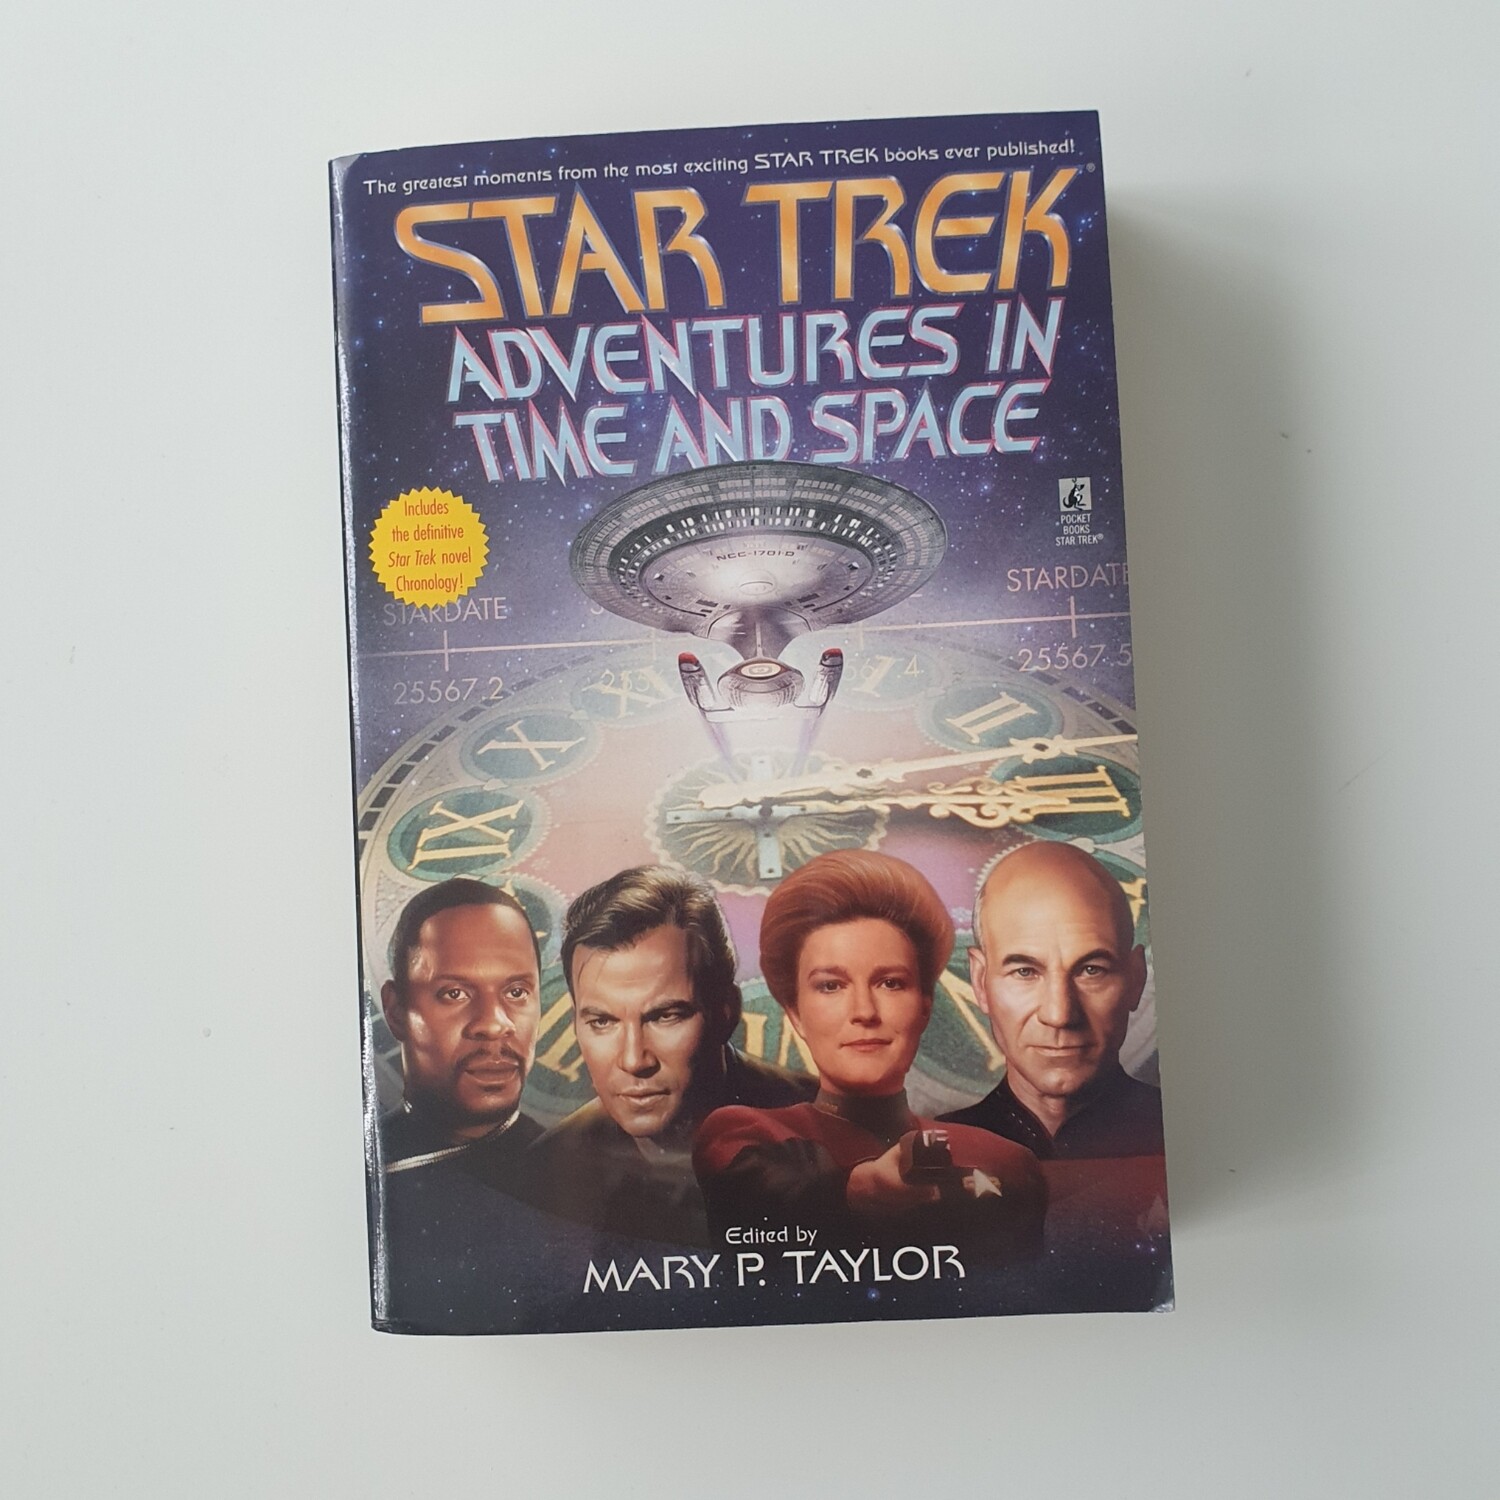 Star Trek Adventures in Time and Space - made from a paperback book